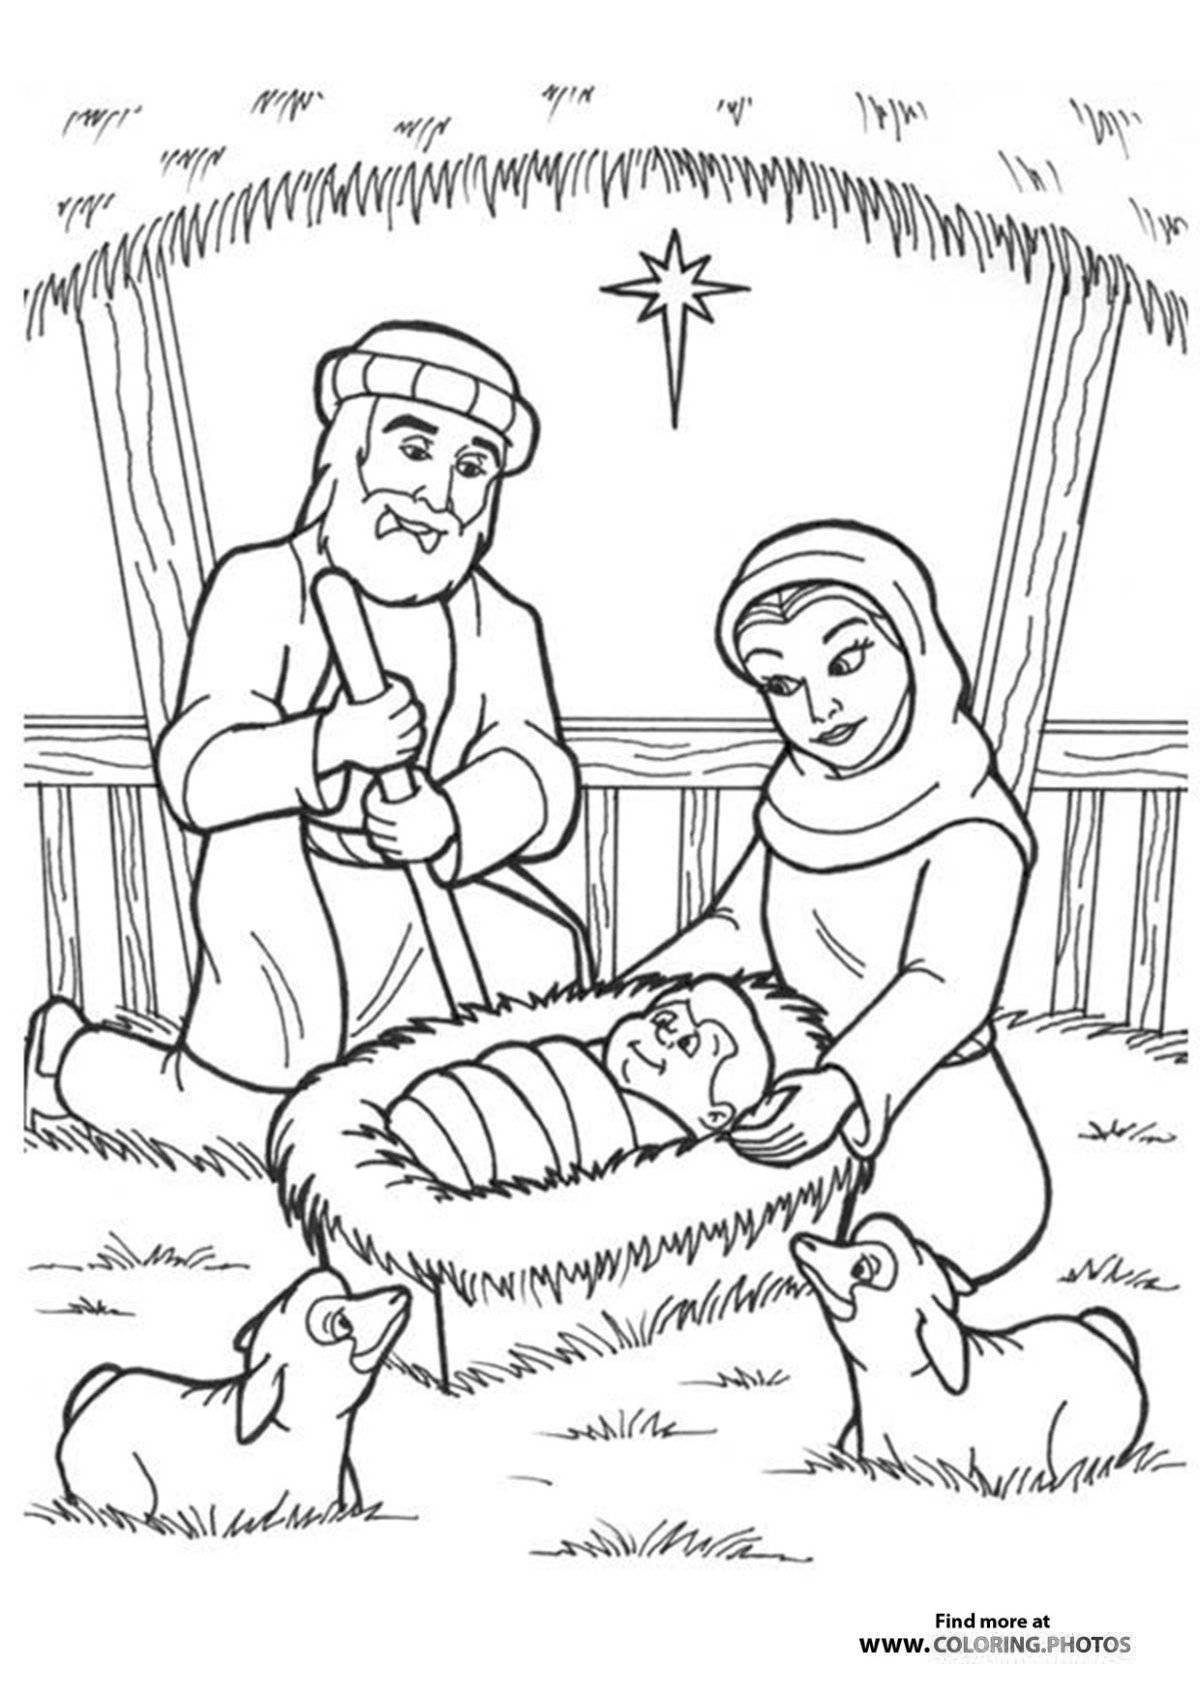 Coloring page glowing birth of jesus christ